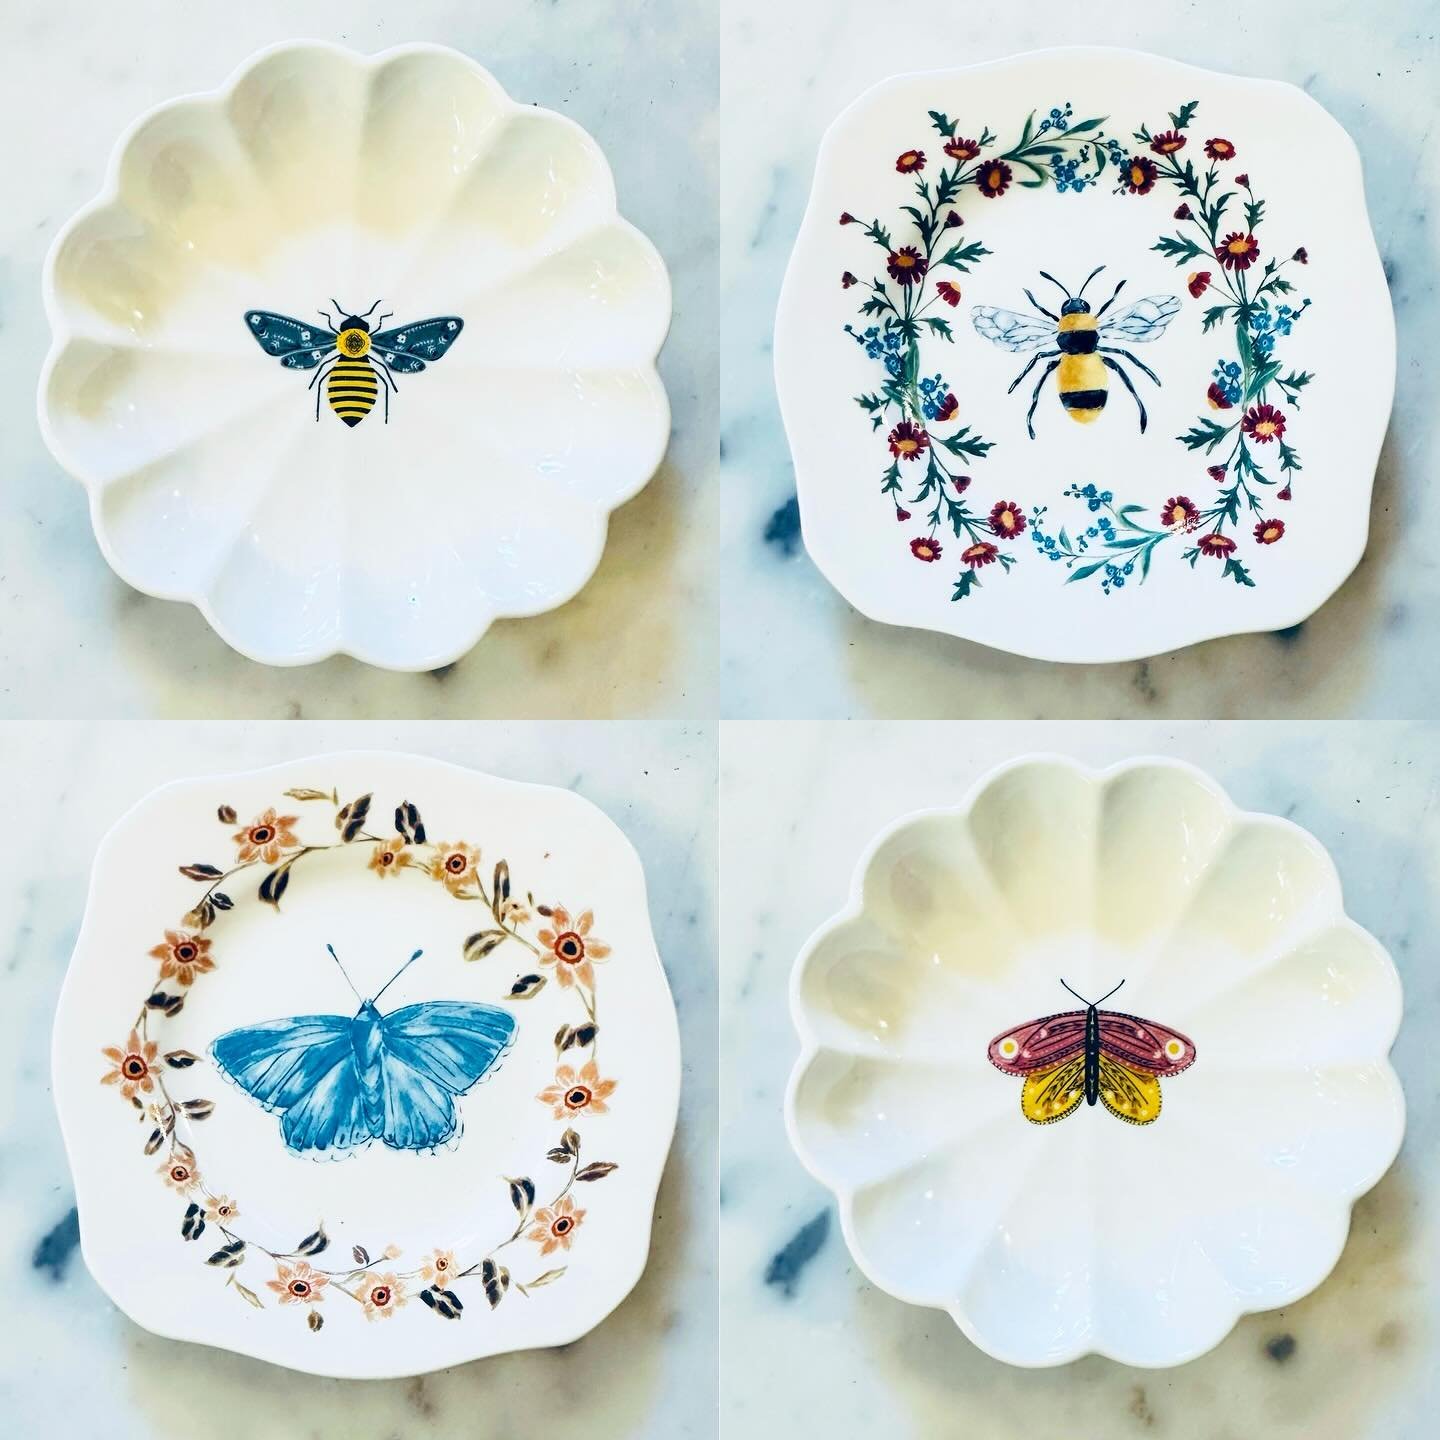 ✨Ooh-la-la! Look at these pretty little dishes! 

#yum #allthingsculinary #cooking #yyc #yycnow #yycliving #yyccooks #yyceats#beltline #beltlineyyc #shoplocal #shoplocalyyc #cookbook #cookbooks #pretty #dishes #kitchen #kitchenware #gift #gifts #moth